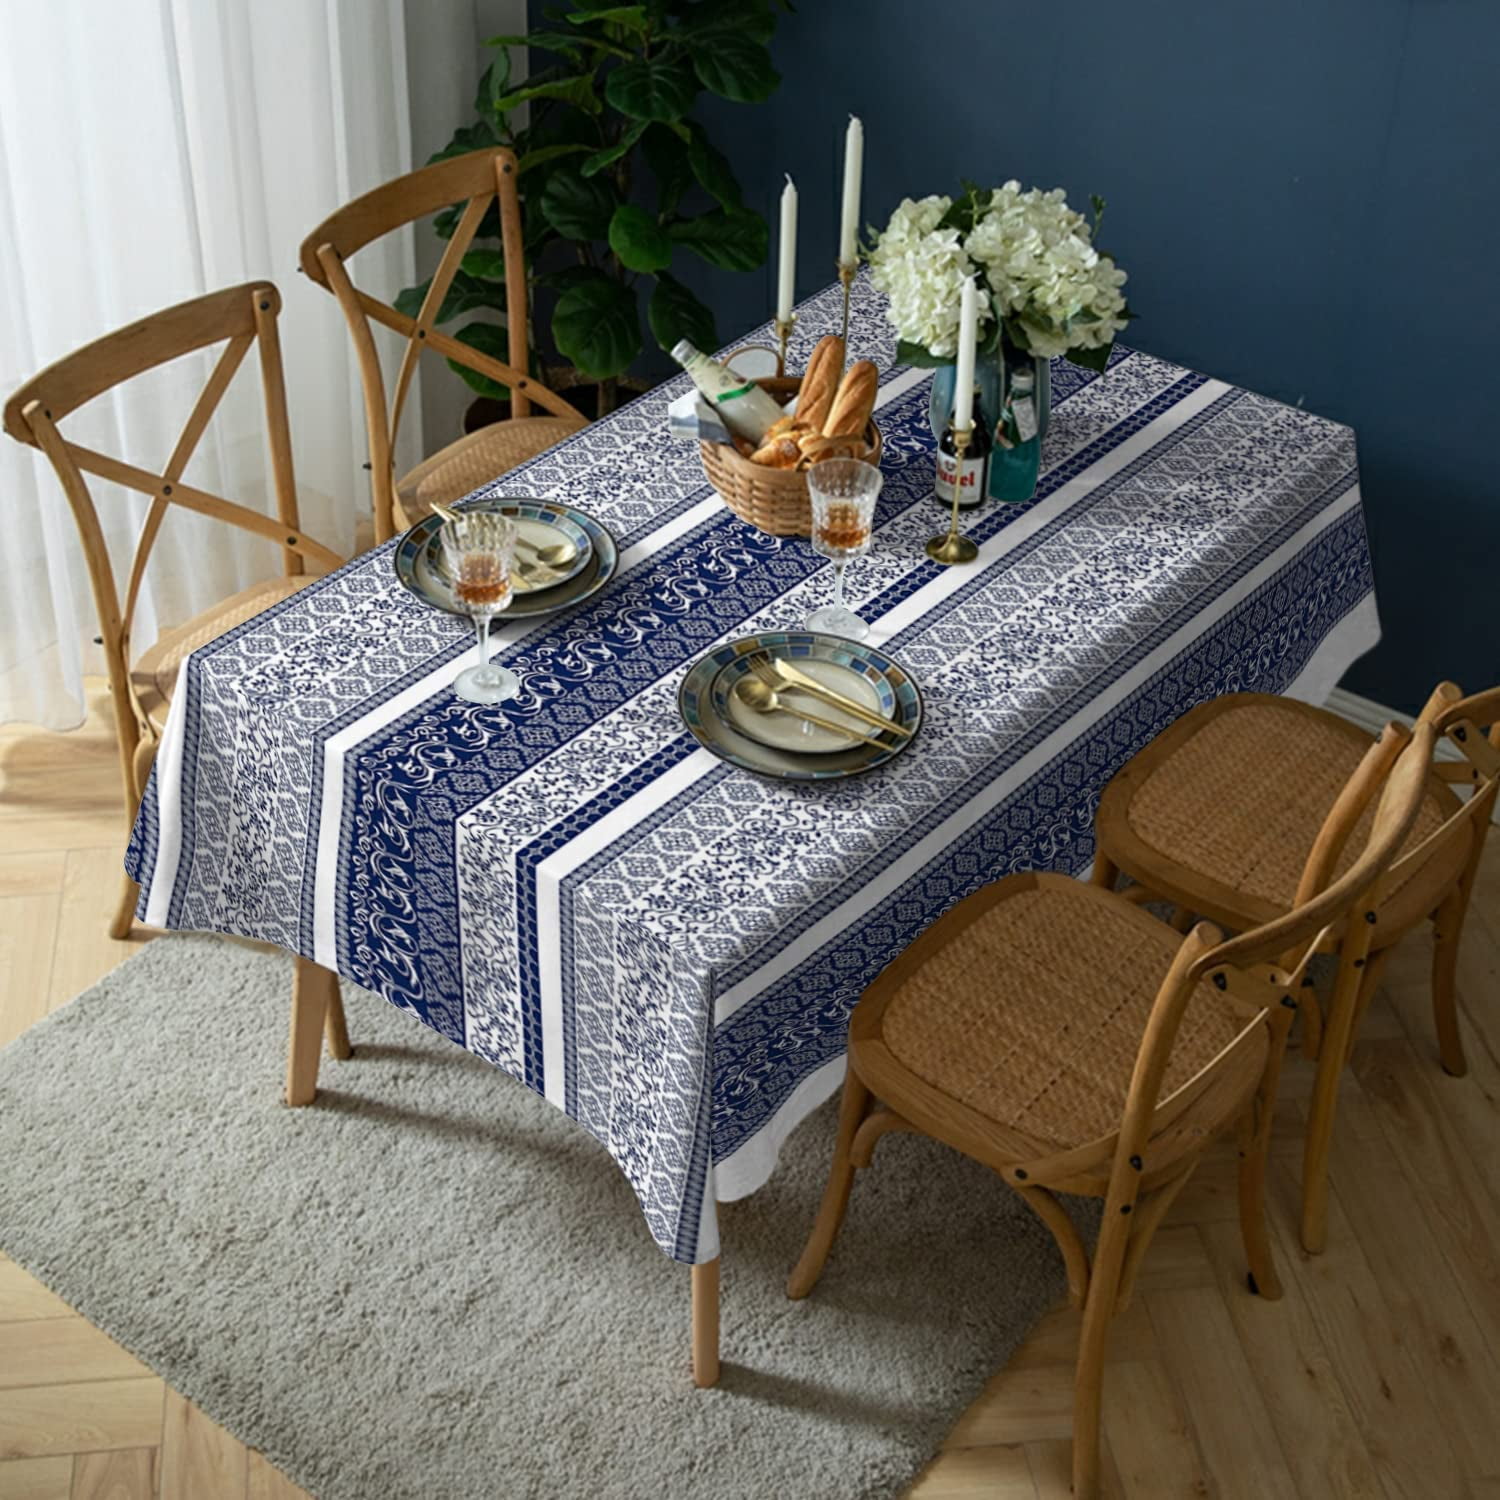 Starlight-rectangular Cotton Linen Tablecloth Table Cloth Linen 140x220 Cm  Elegant Tablecloth Rectangle For Home Dining Room Kitchen Table Decoration